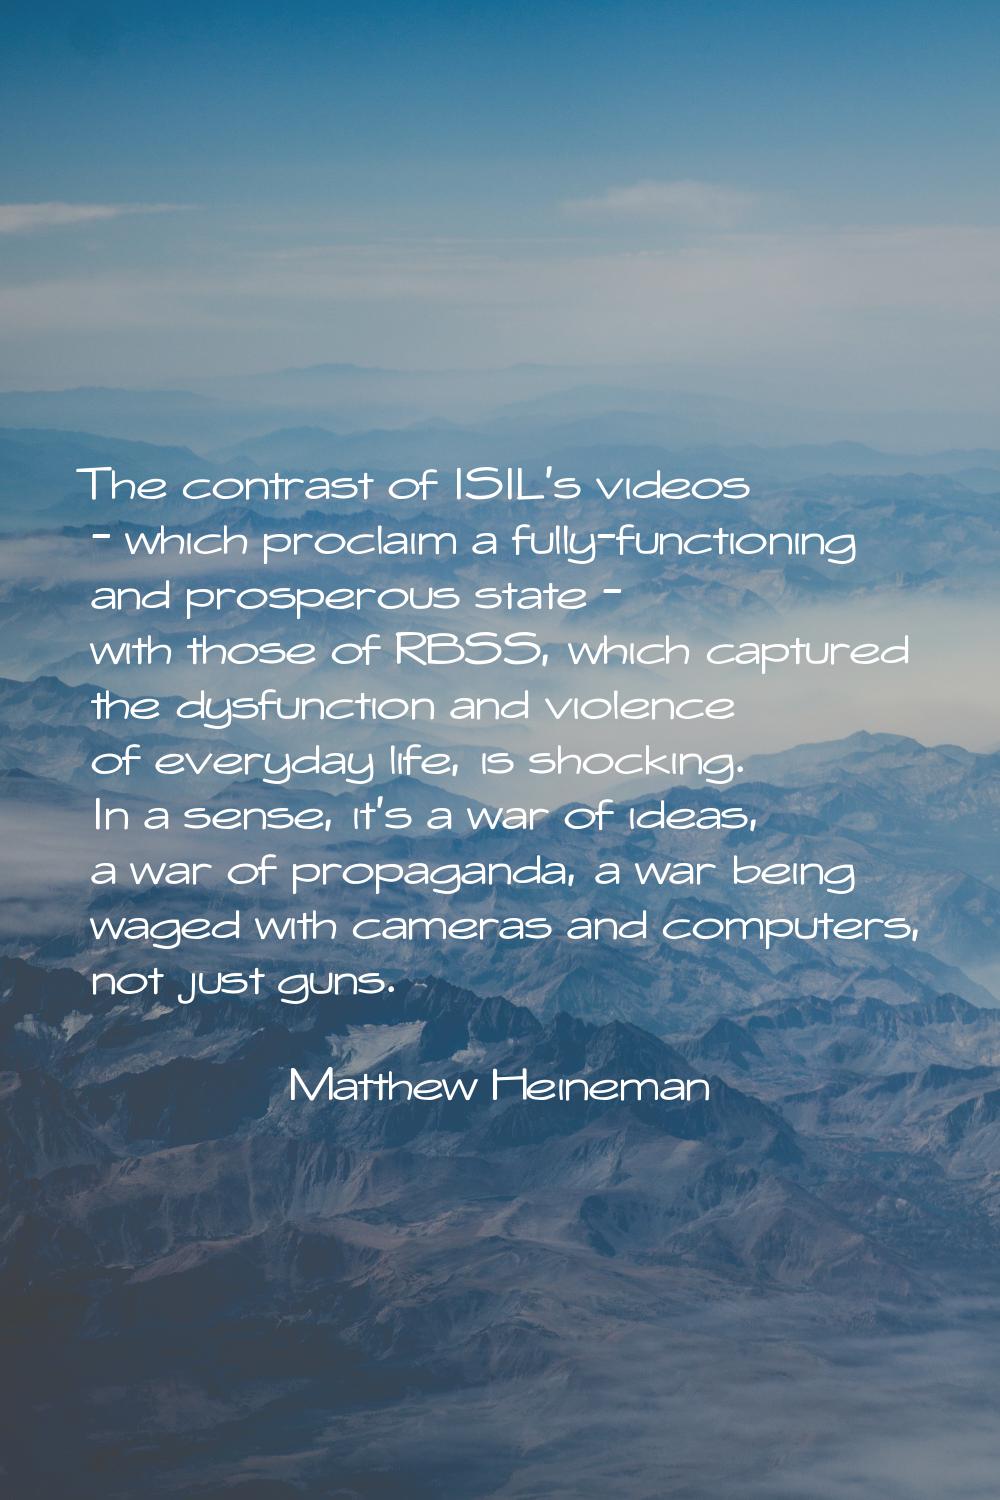 The contrast of ISIL's videos - which proclaim a fully-functioning and prosperous state - with thos